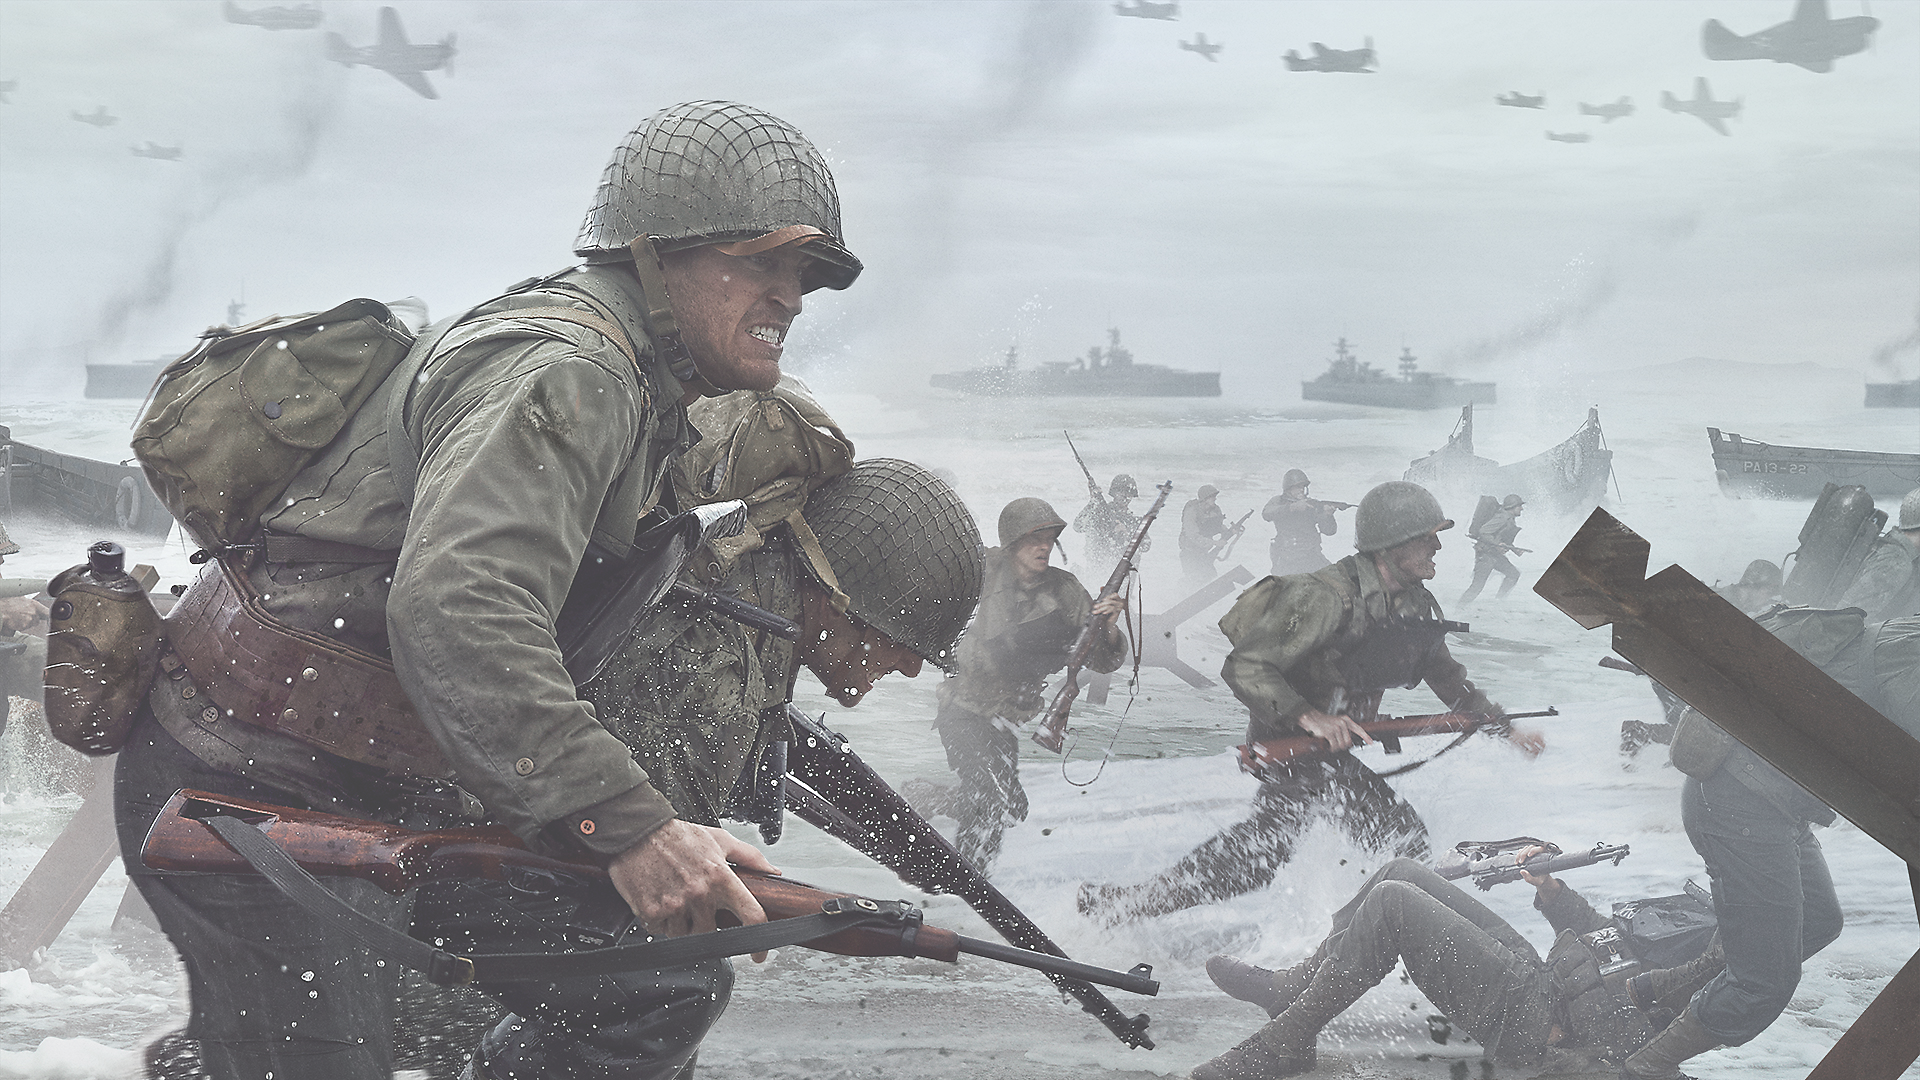 Cod Wwii Wallpapers